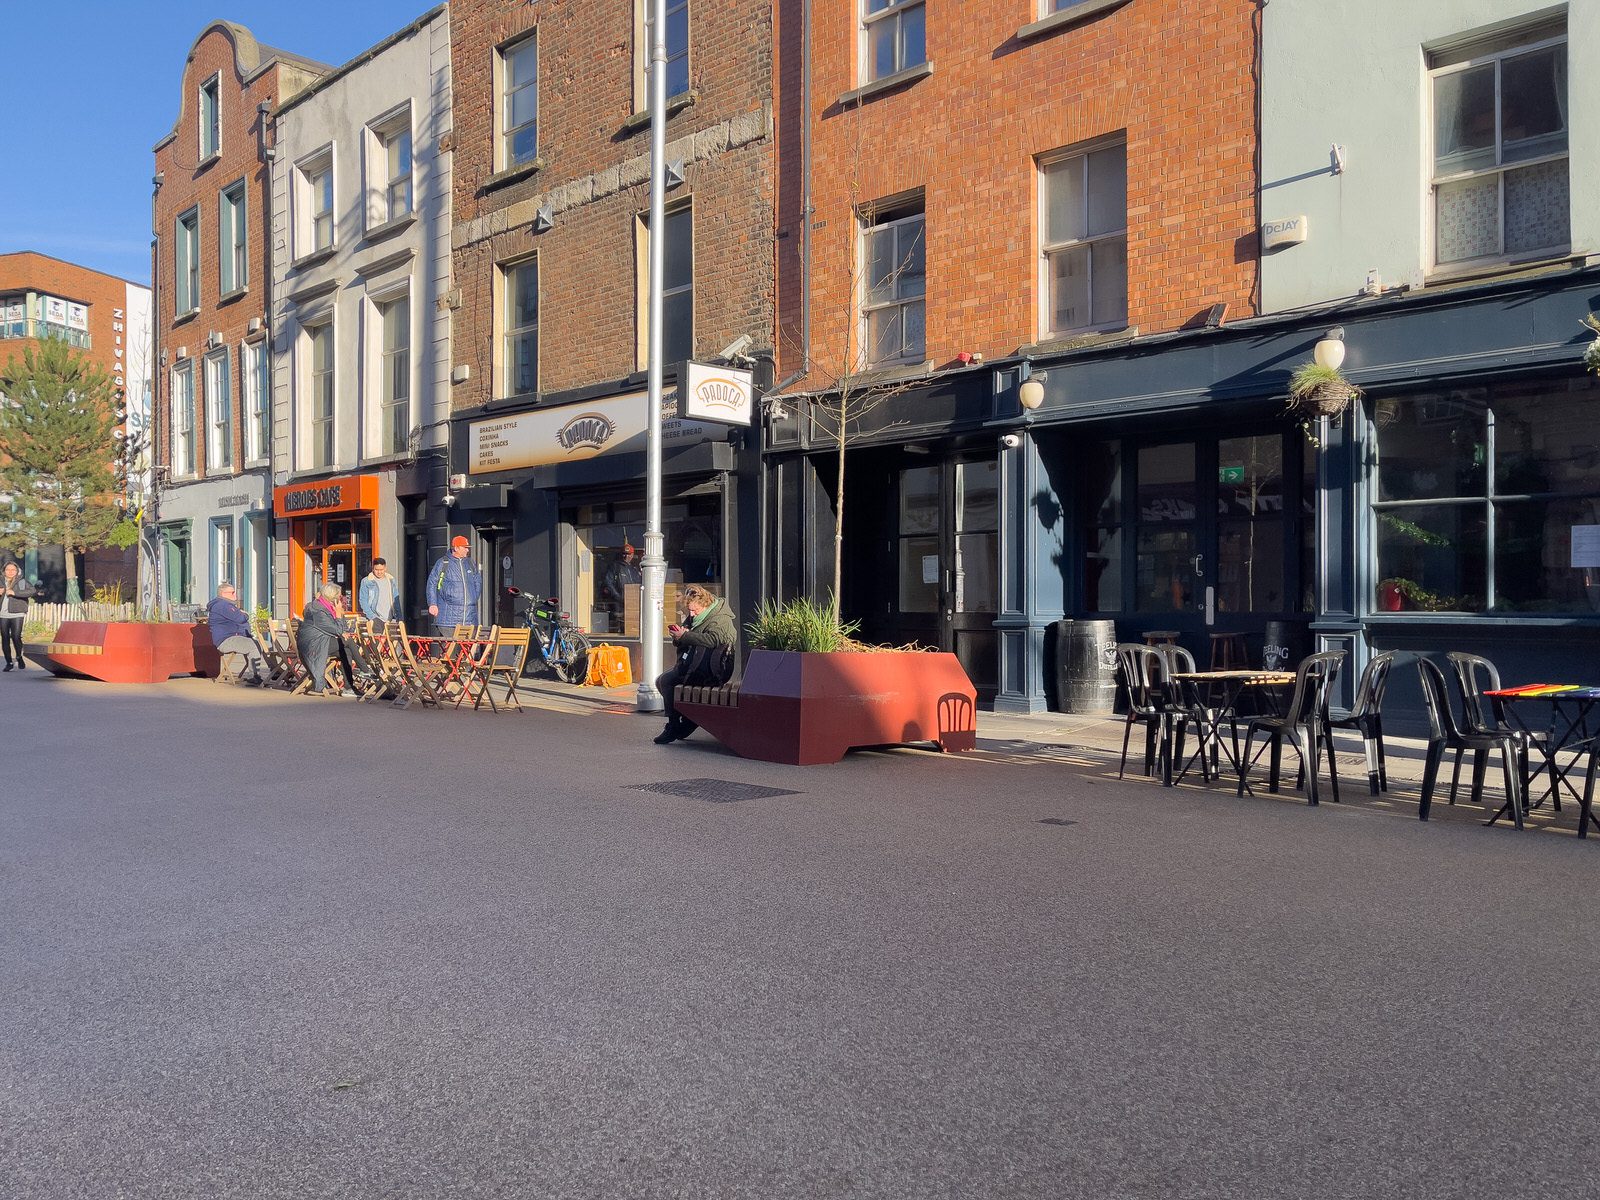 THE NEW STREET FURNITURE AND THE CHRISTMAS TREE [HAVE ARRIVED IN CAPEL STREET]-225848-1